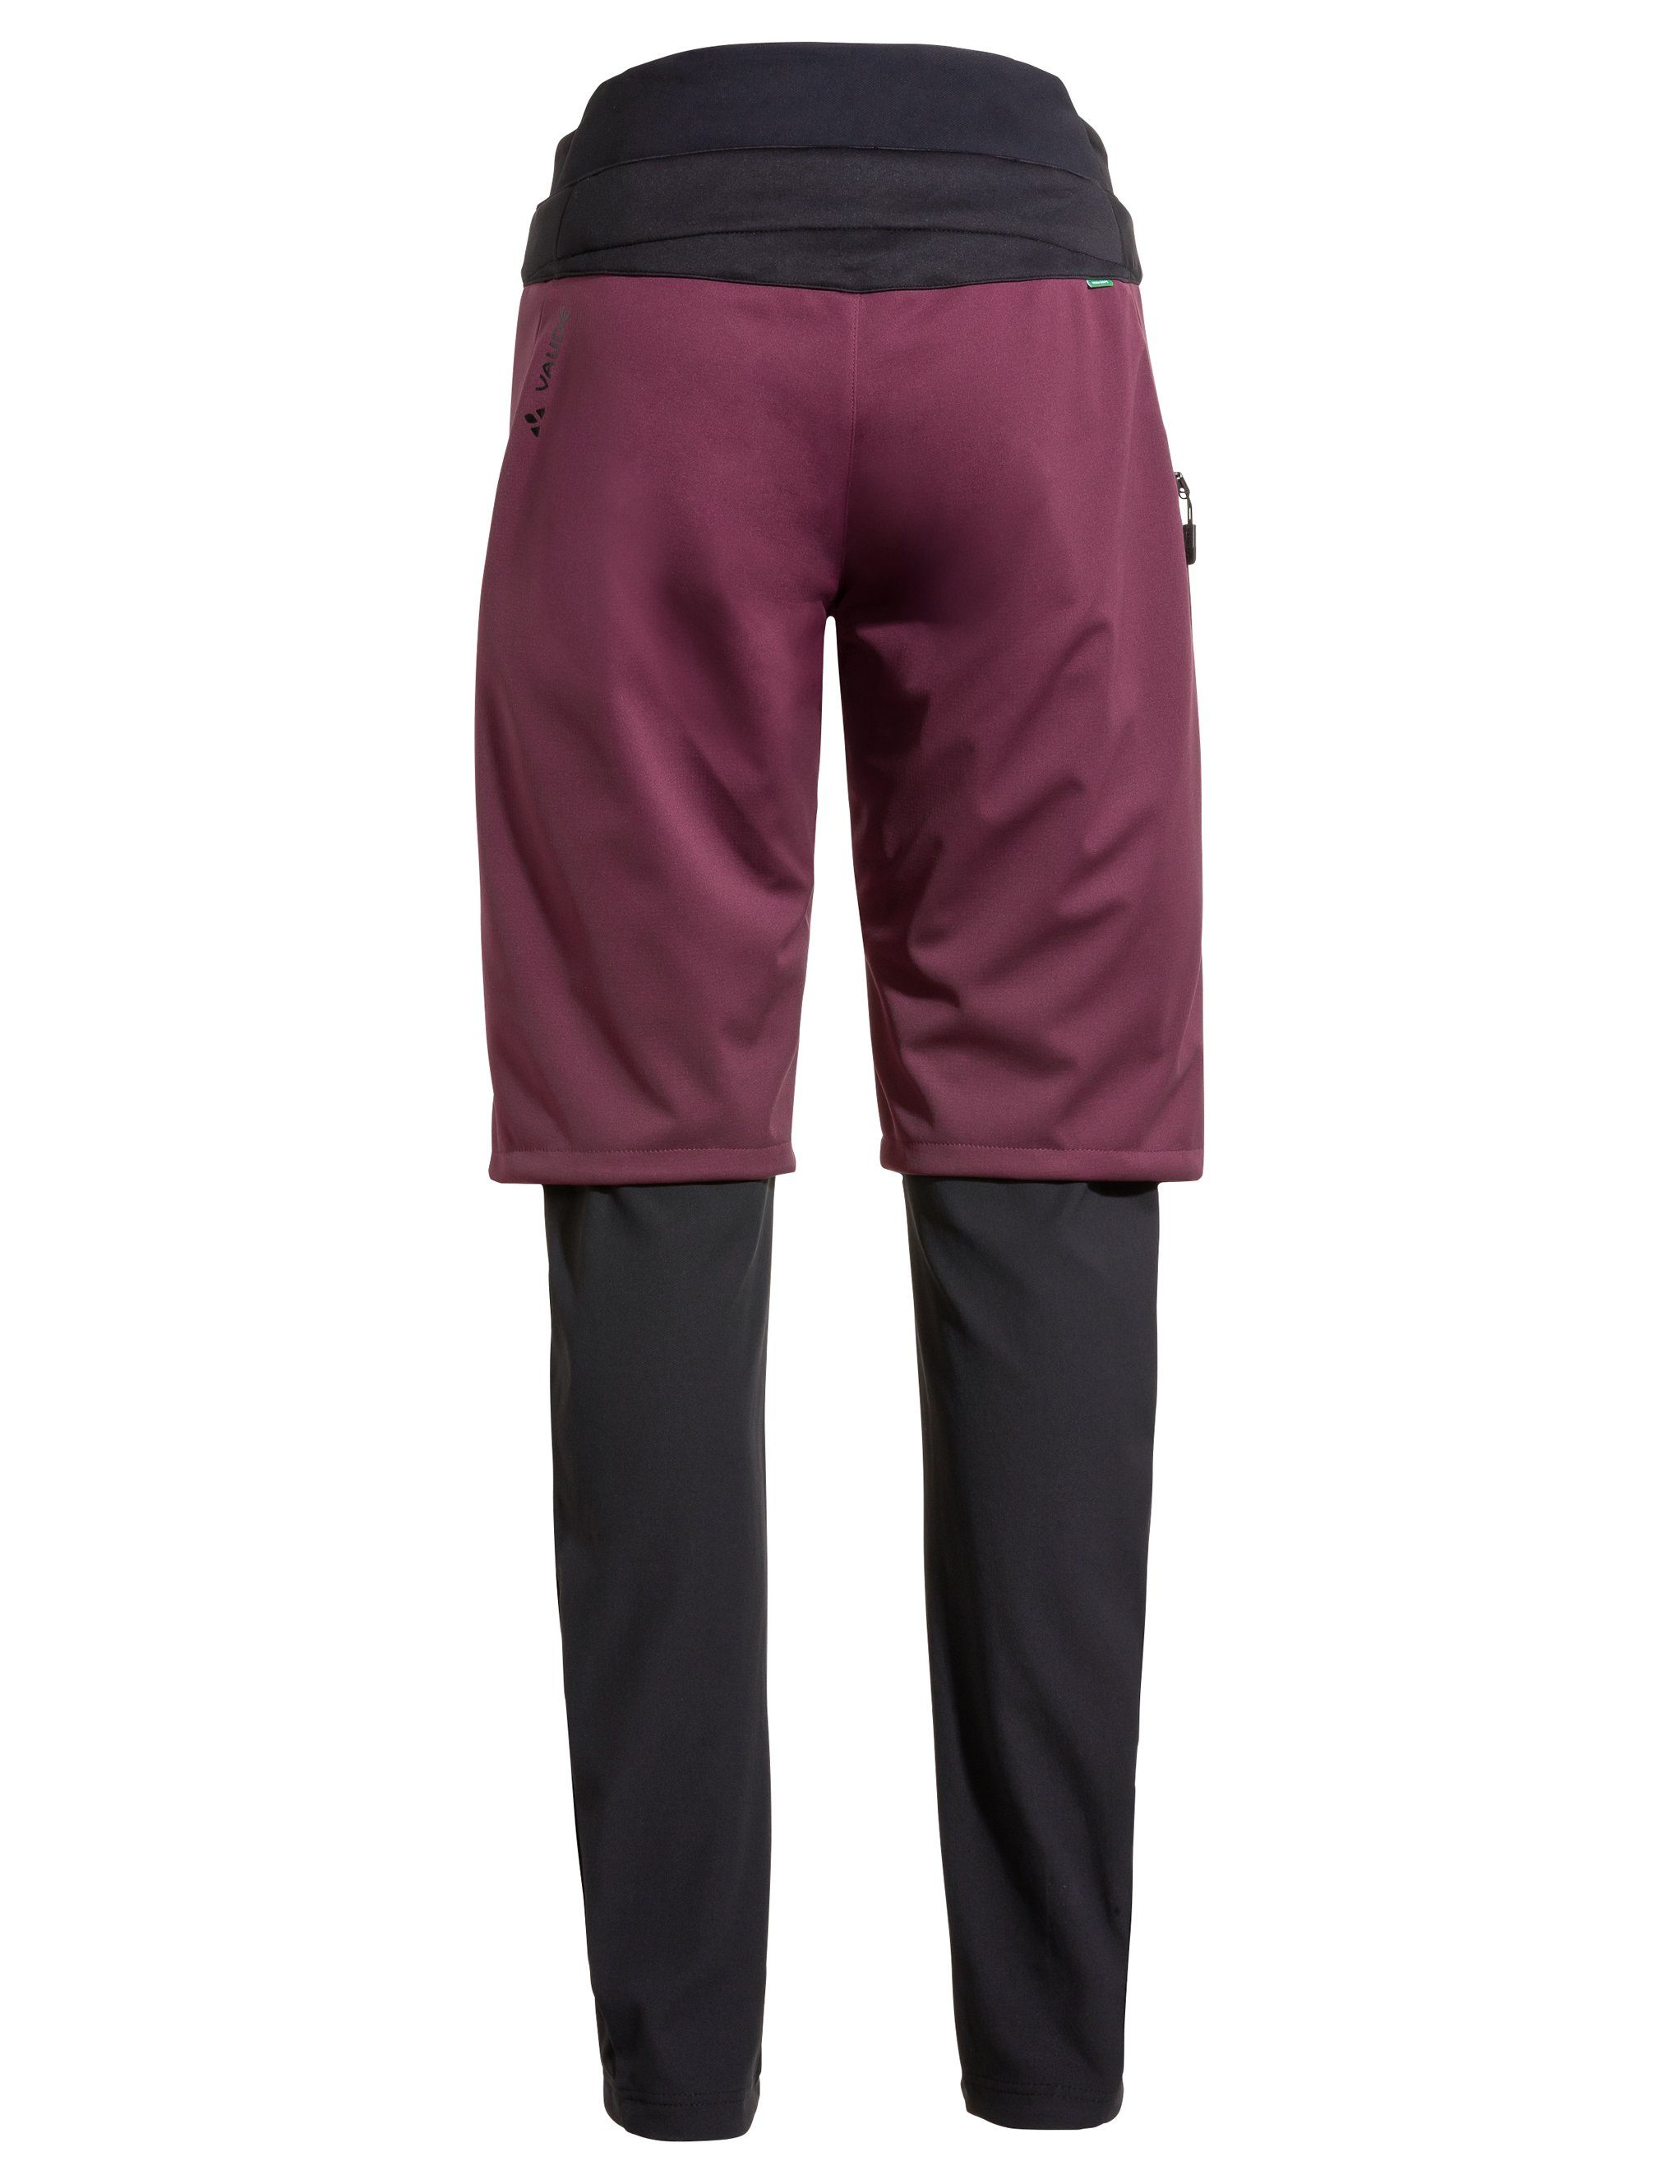 cassis Year Pants Grüner Funktionshose w/o Knopf SC All (1-tlg) 3in1 Moab VAUDE Women's